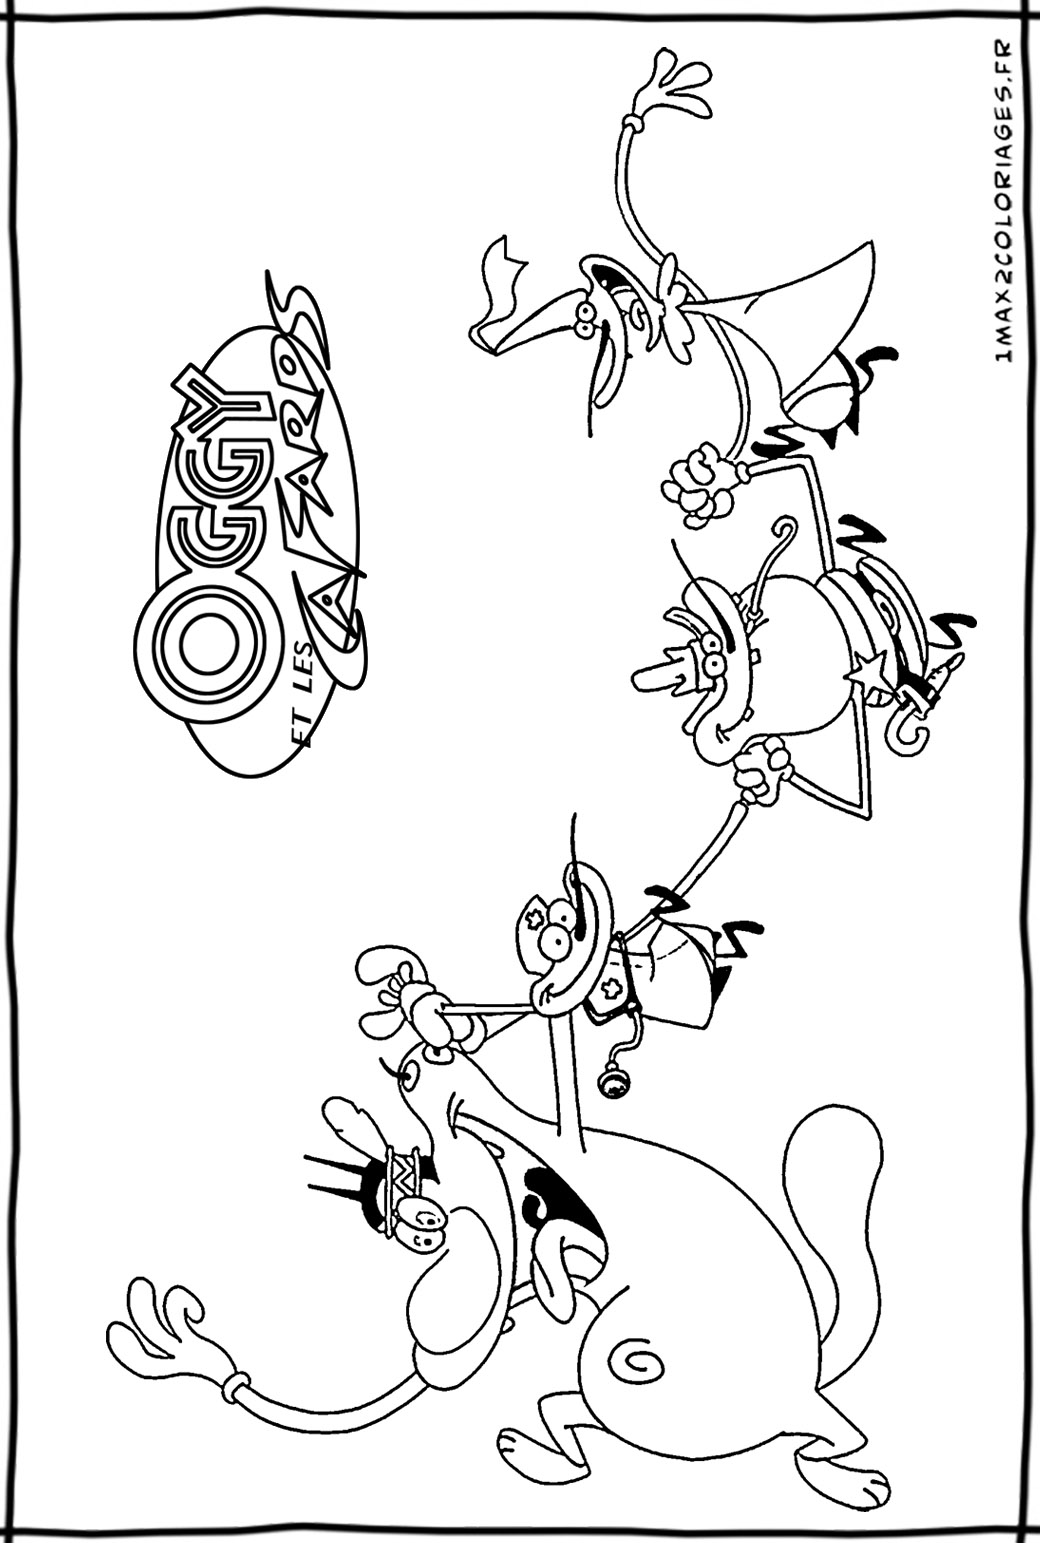 acme cartoon coloring pages - photo #5